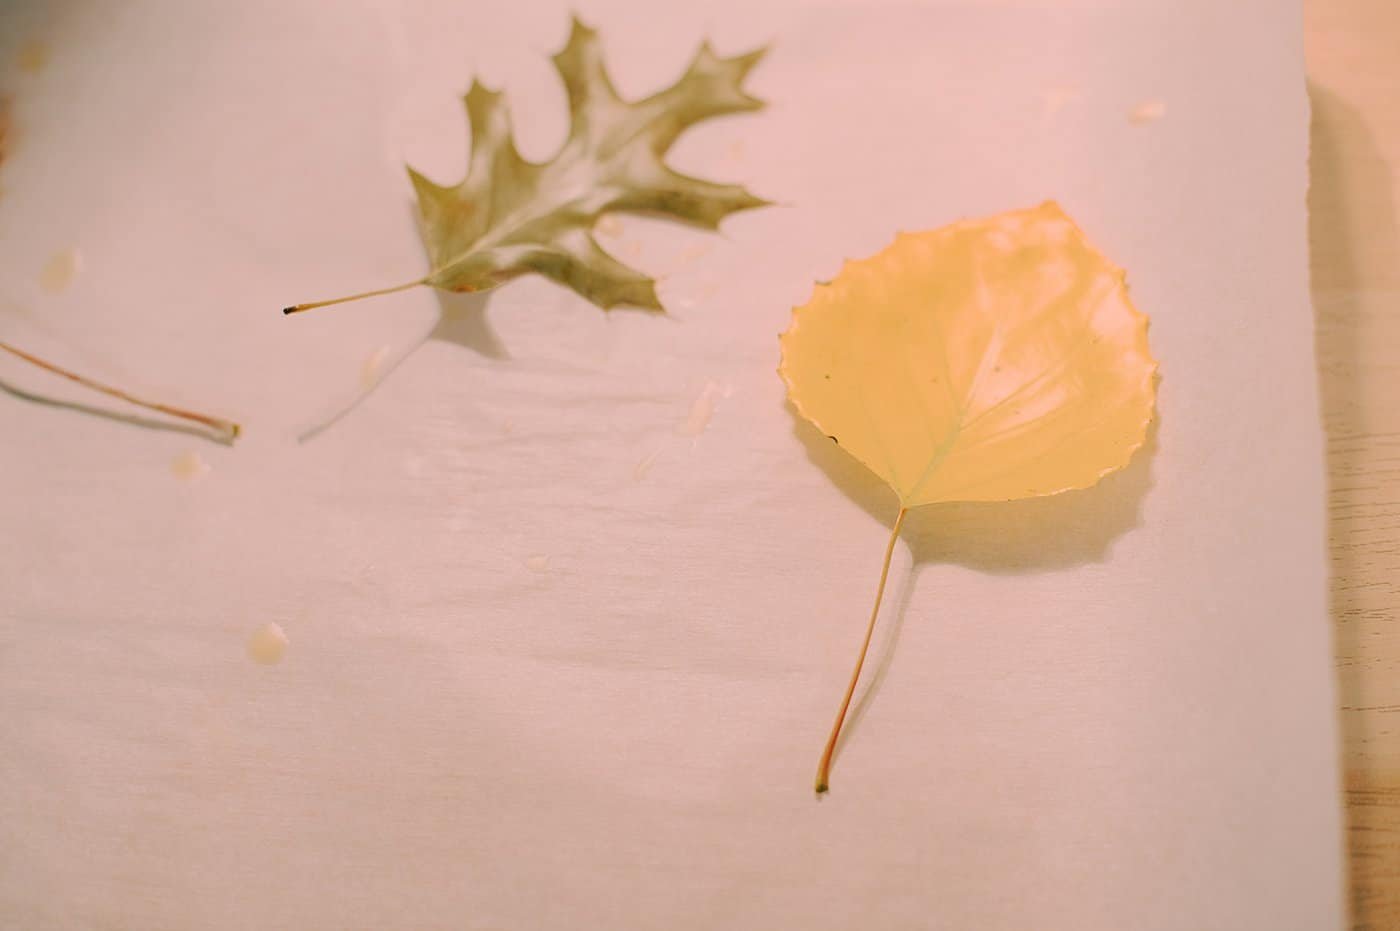 Lay wax covered leaves on parchment paper while the wax hardens and cools.